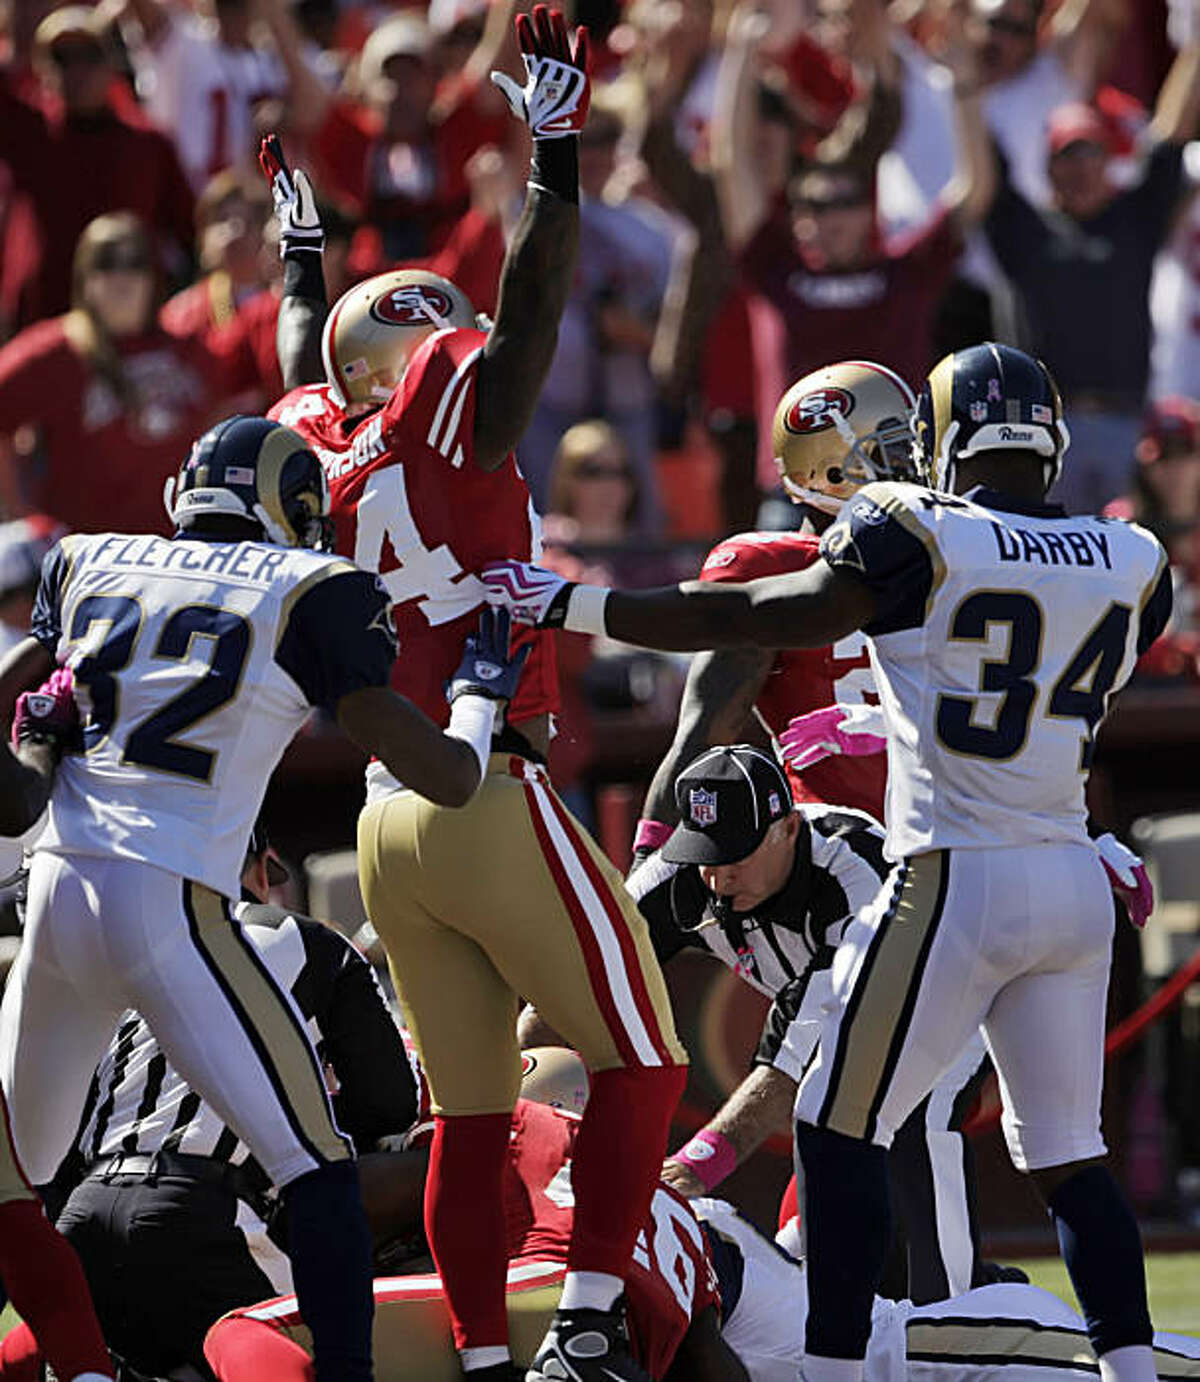 The 49ers' Michael Robinson celebrates the Rams' botched punt return recovered by Scott McKillop for a touchdown. The 49ers played the St. Louis Rams at Candlestick Park in San Francisco on Sunday.